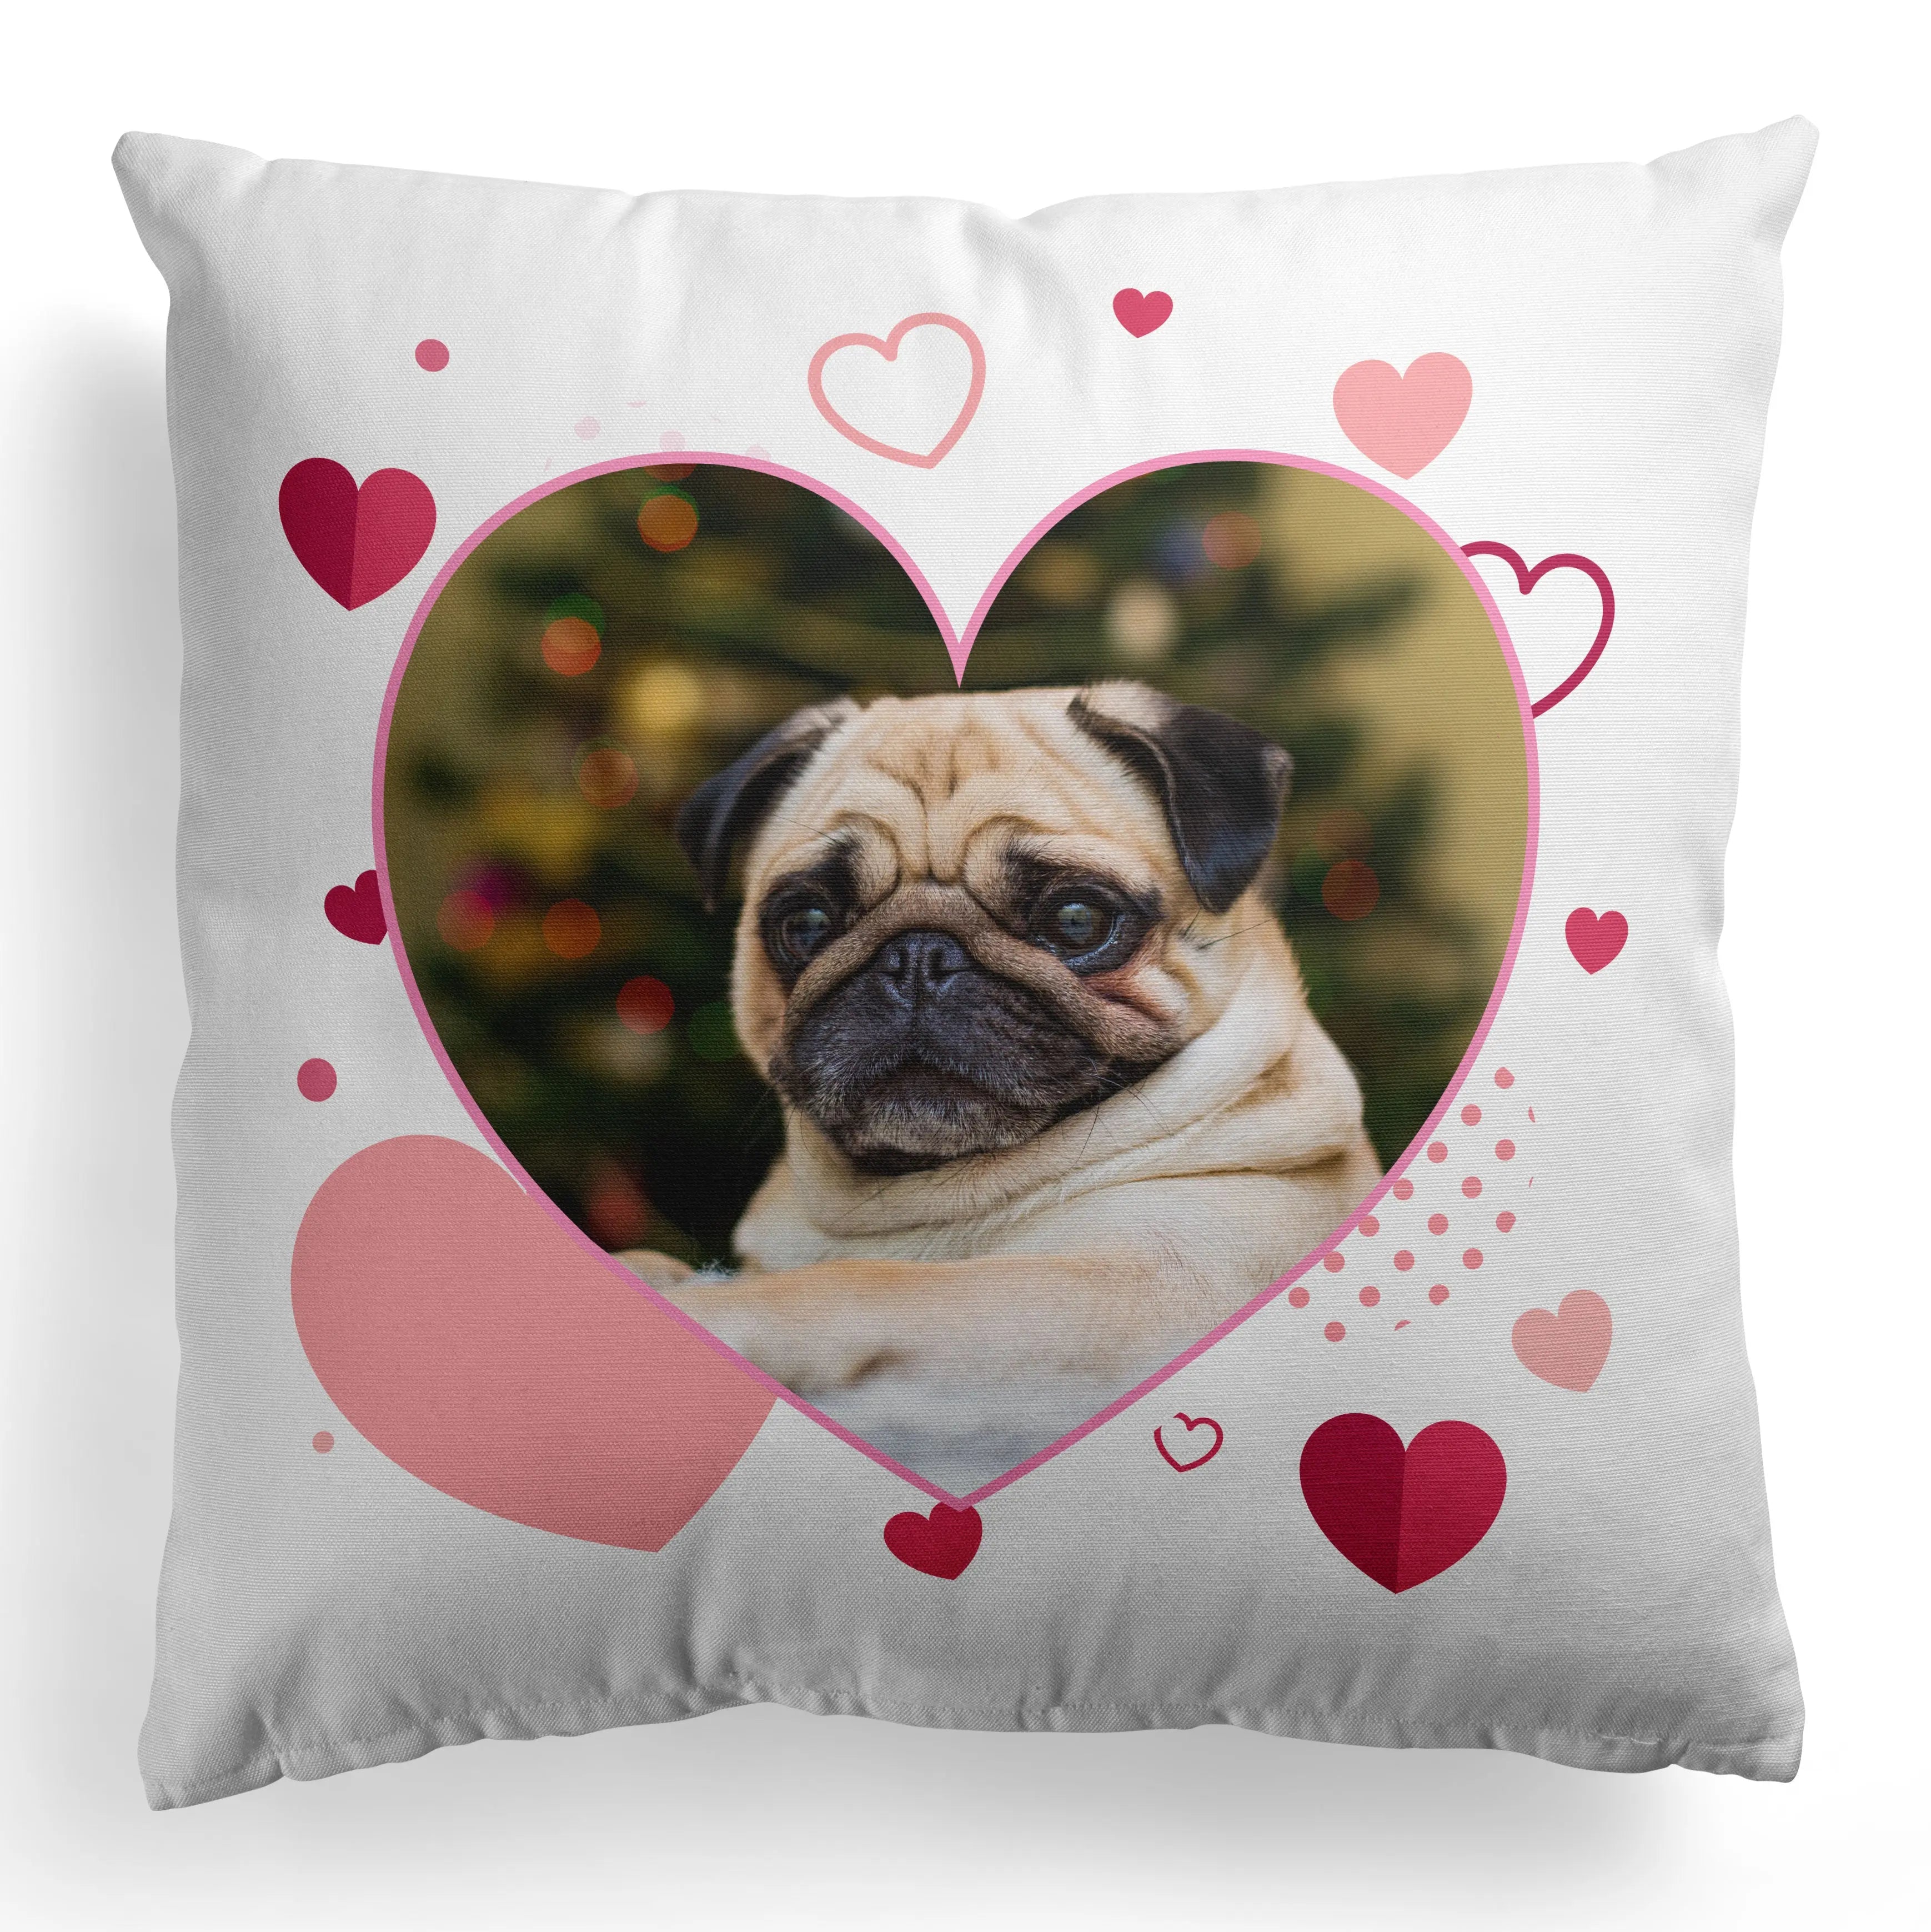 Personalised Cushion  Valentines Day| Couples & Romance  40x40cm  1 Image  Heart